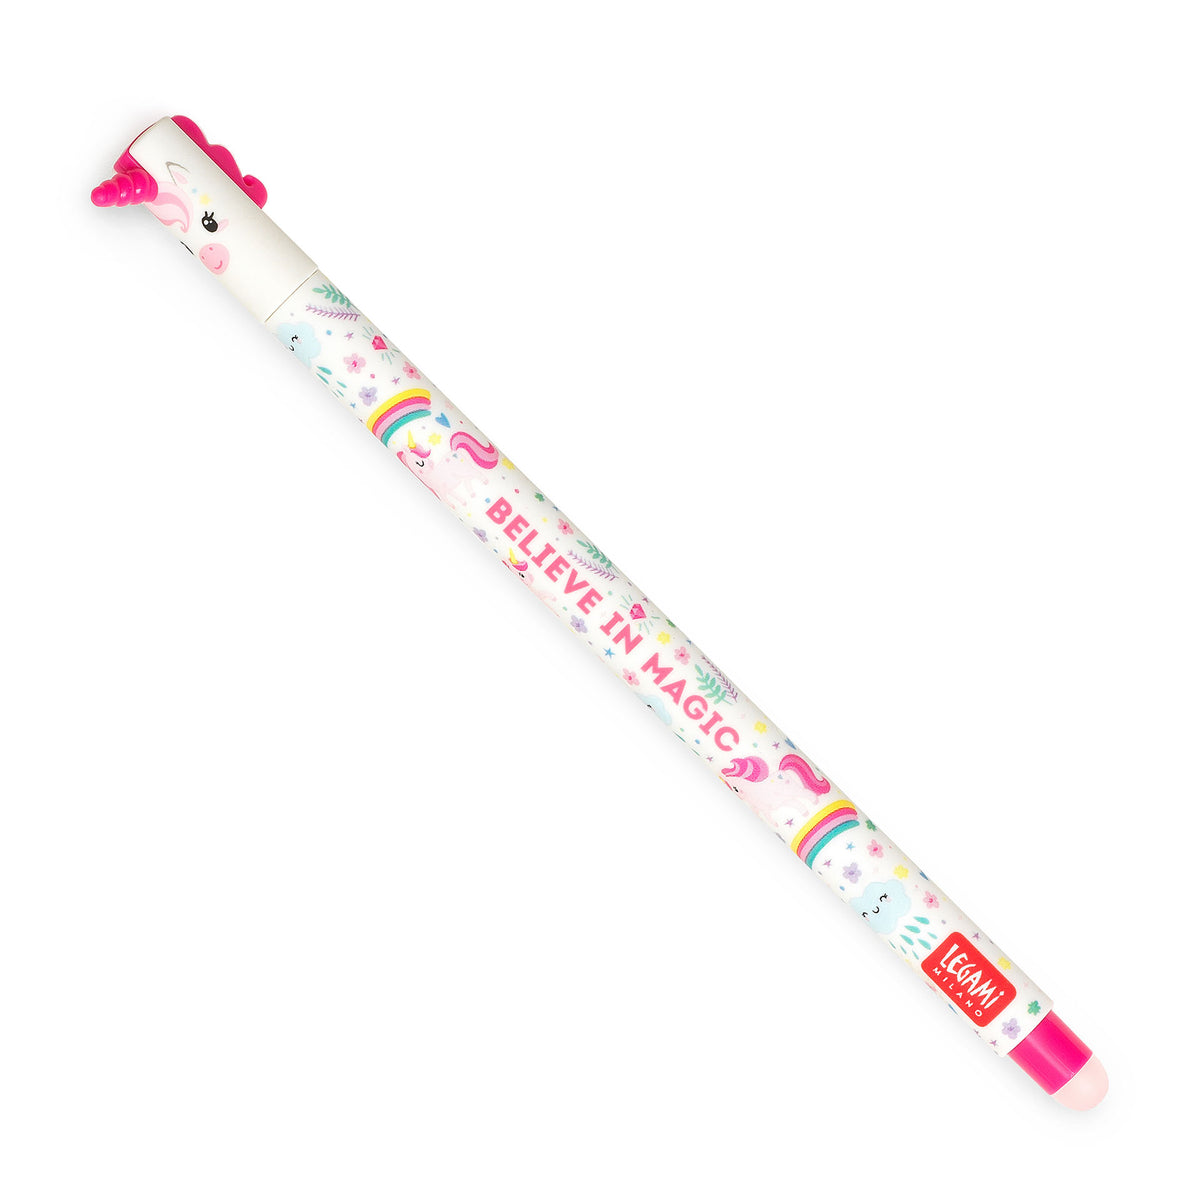 An image of a white coloured patterned erasable pen by Legami. The cap of the pen is like the head of a unicorn with a unicorn horn and mane formed on the sides. It has an erasable ball at the other end of the pen.